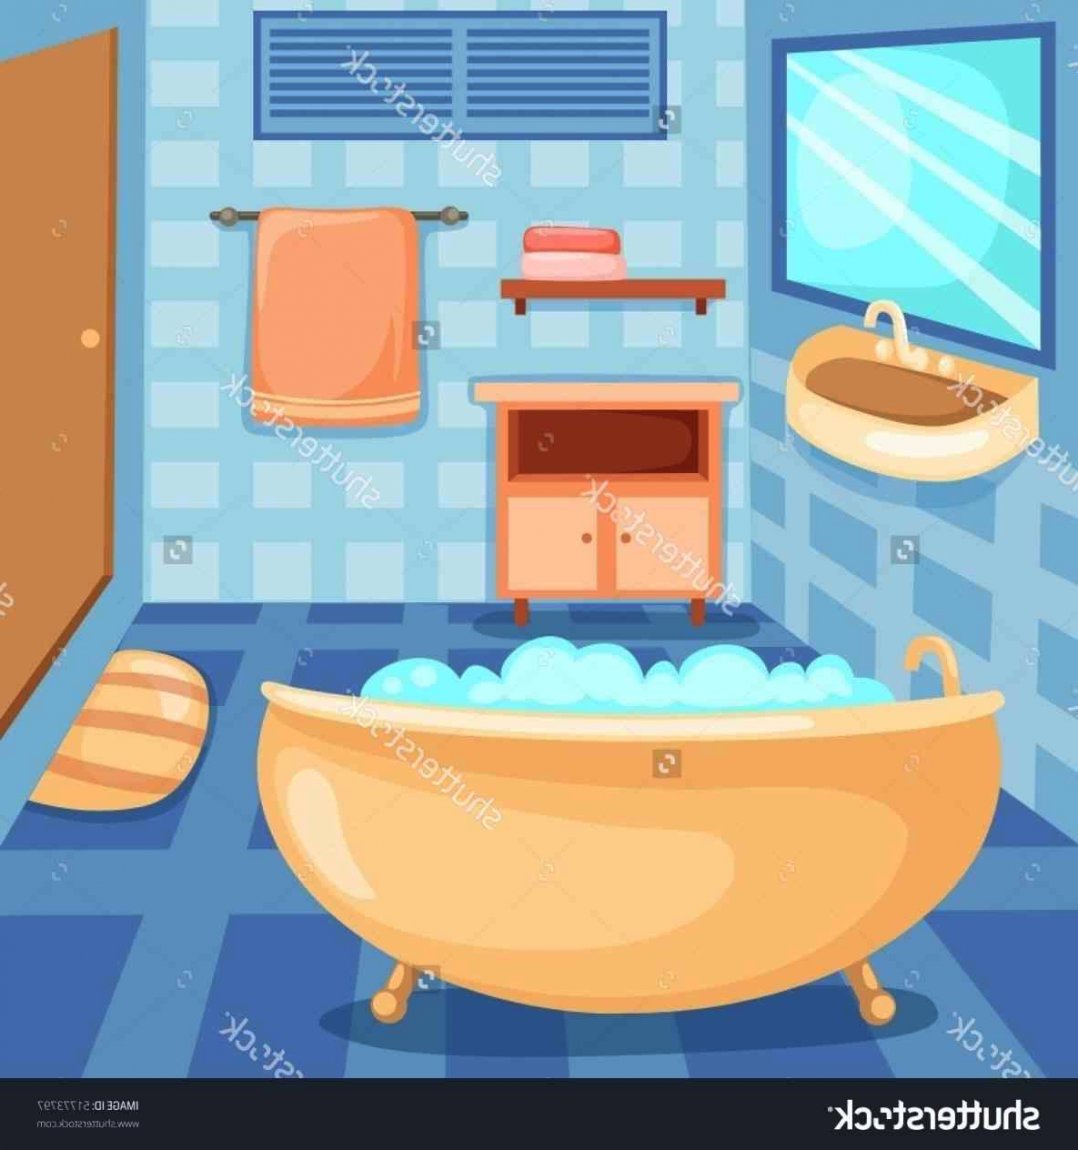 Bathroom clipart. Picture of free panda